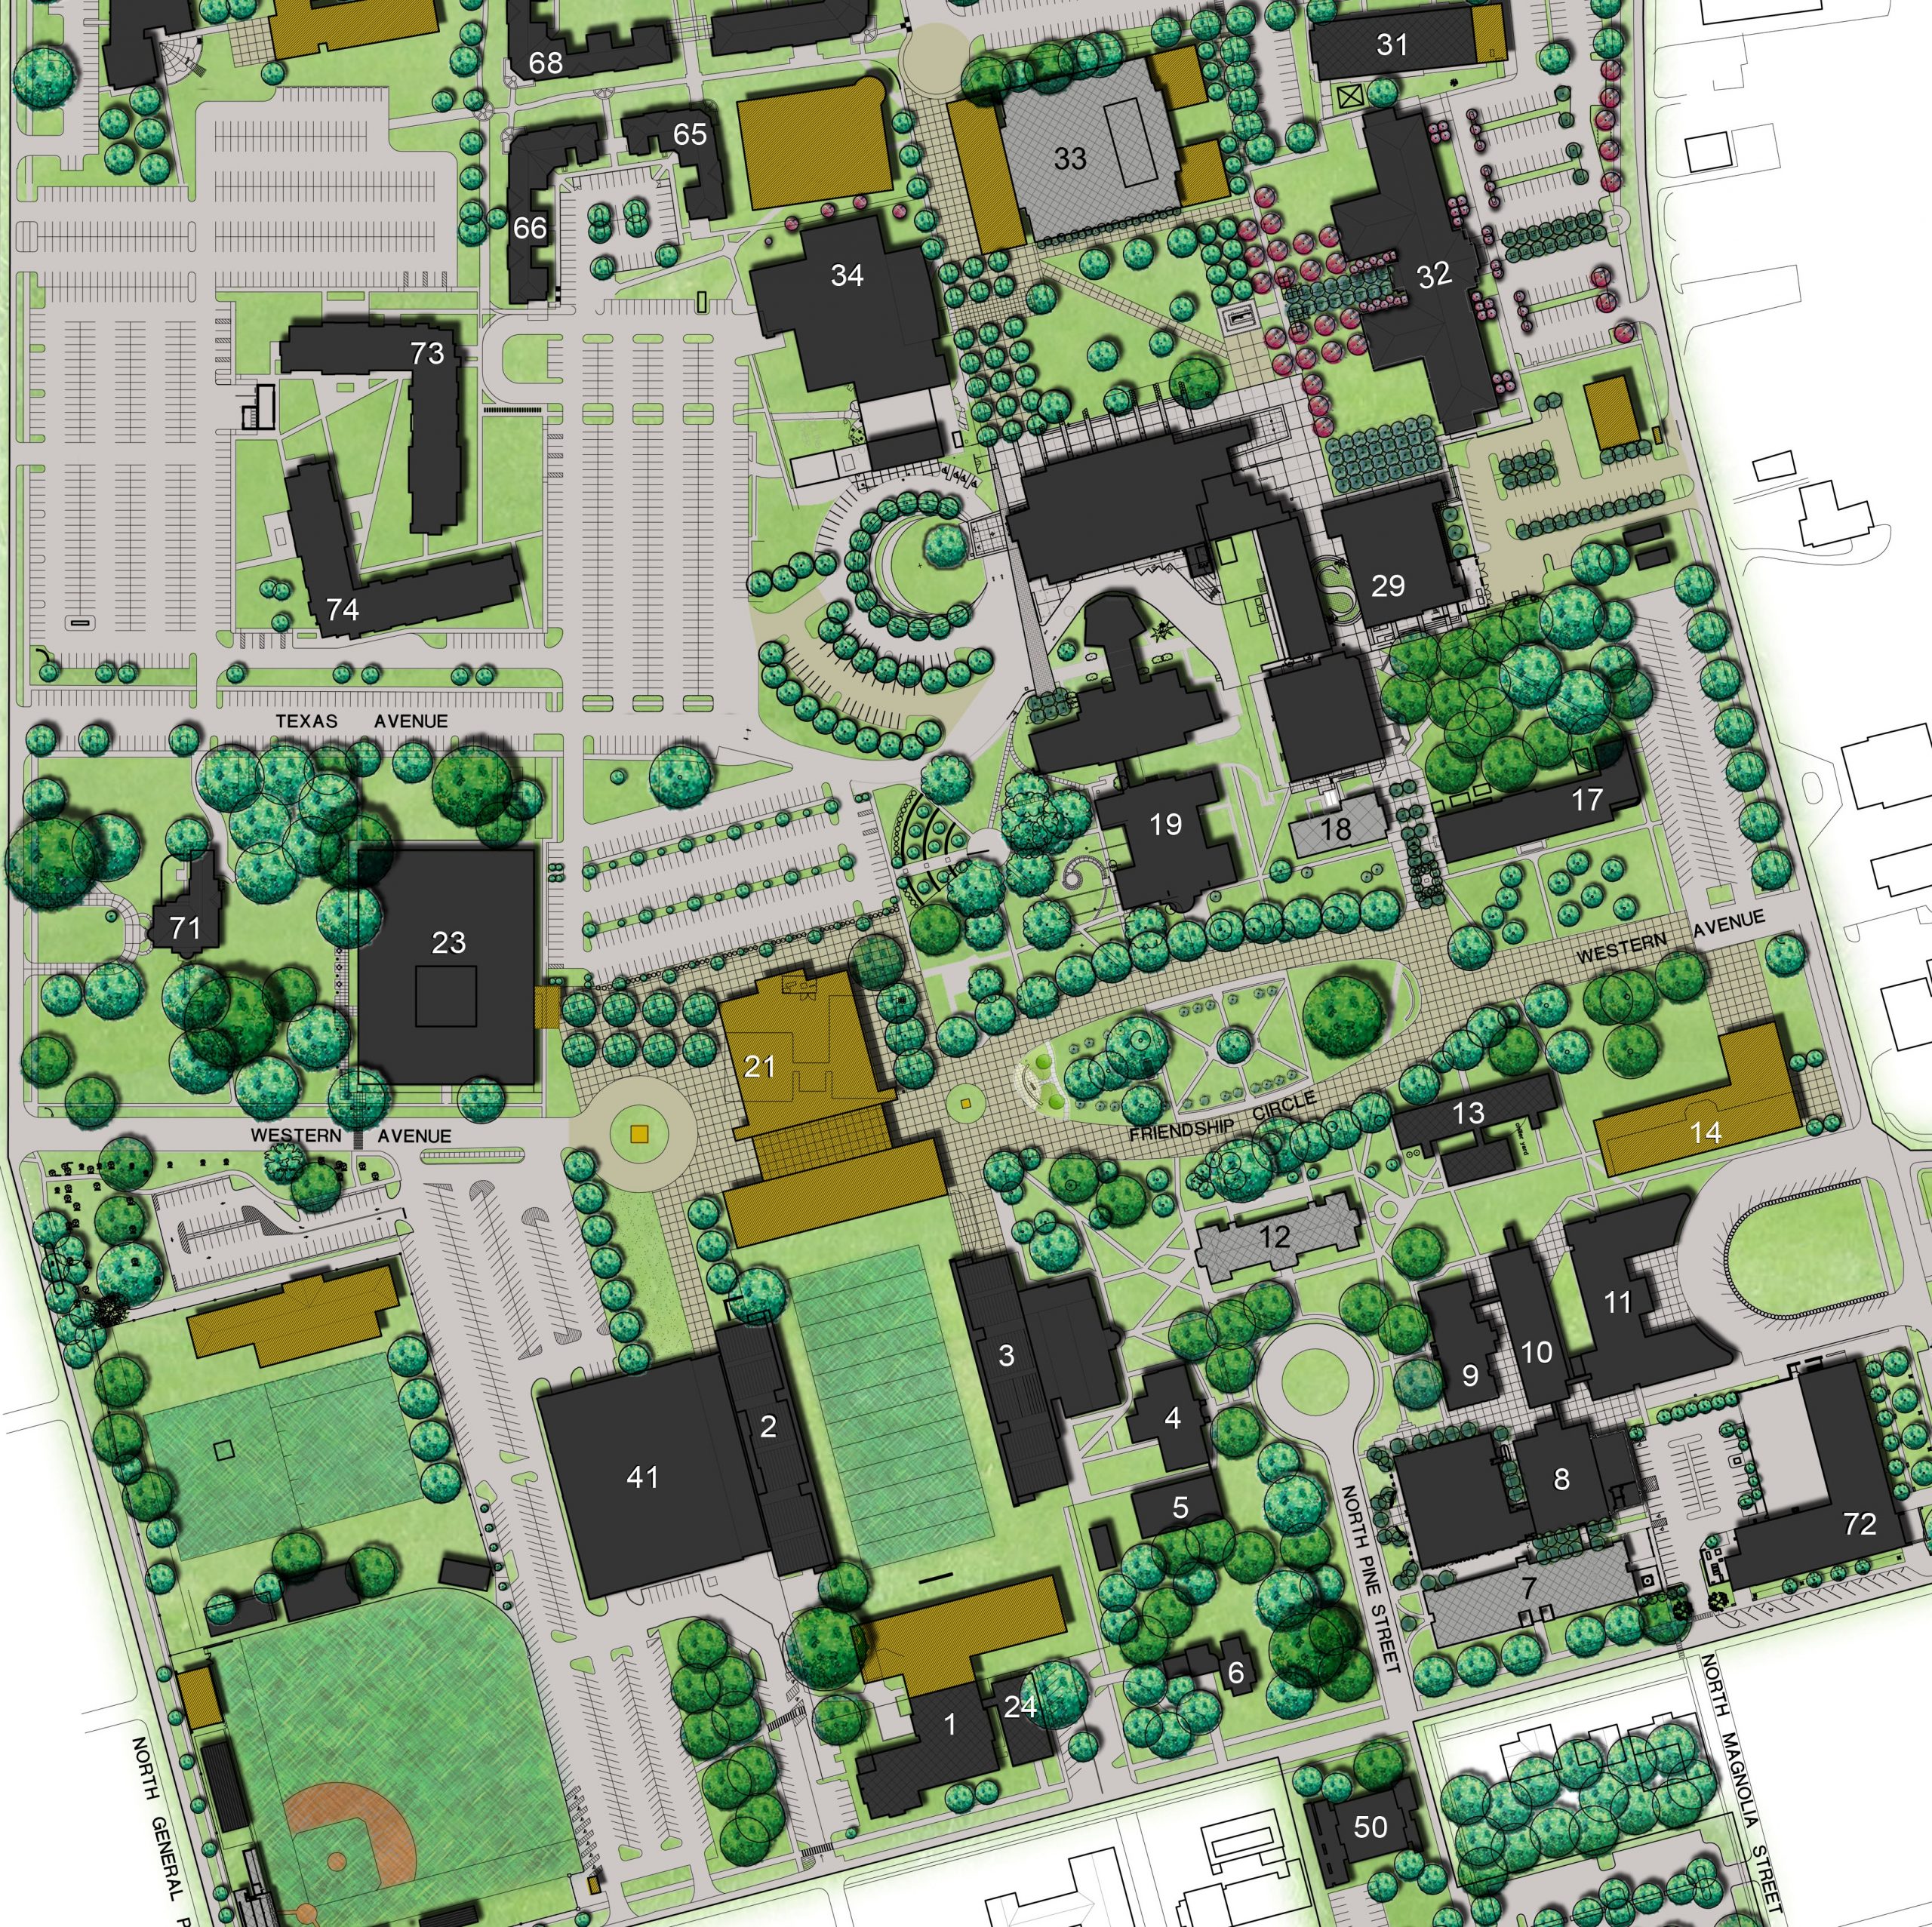 H/S completes update for Southeastern’s Master Plan and the growing campus